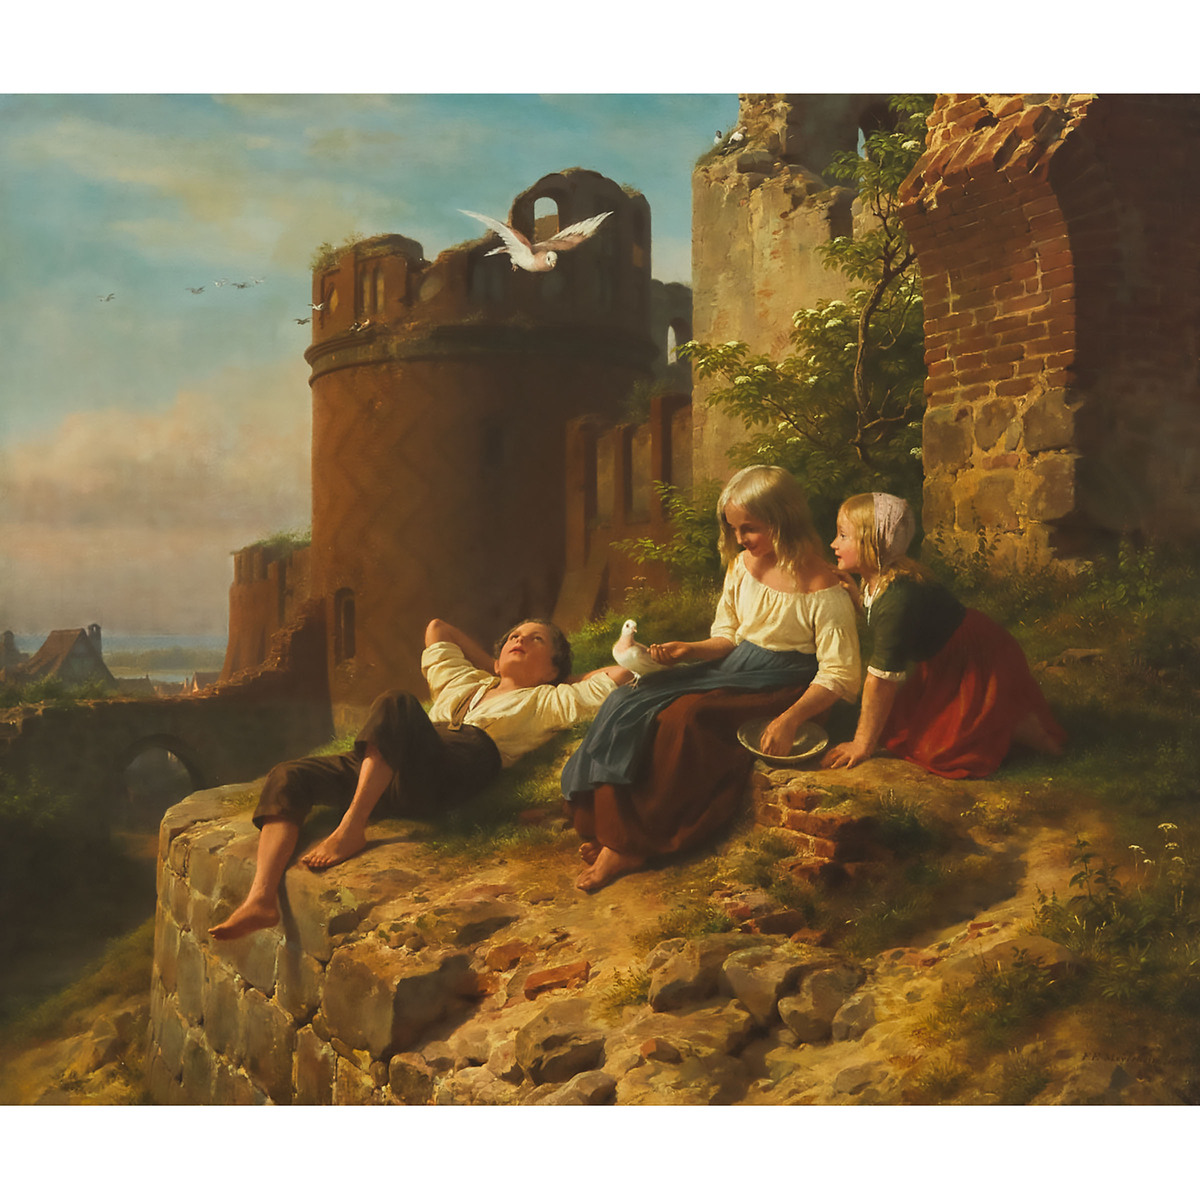 Friedrich Eduard Meyerheim (1808-1879), CHILDREN PLAYING BY THE RUINS, 1845, signed and dated lower